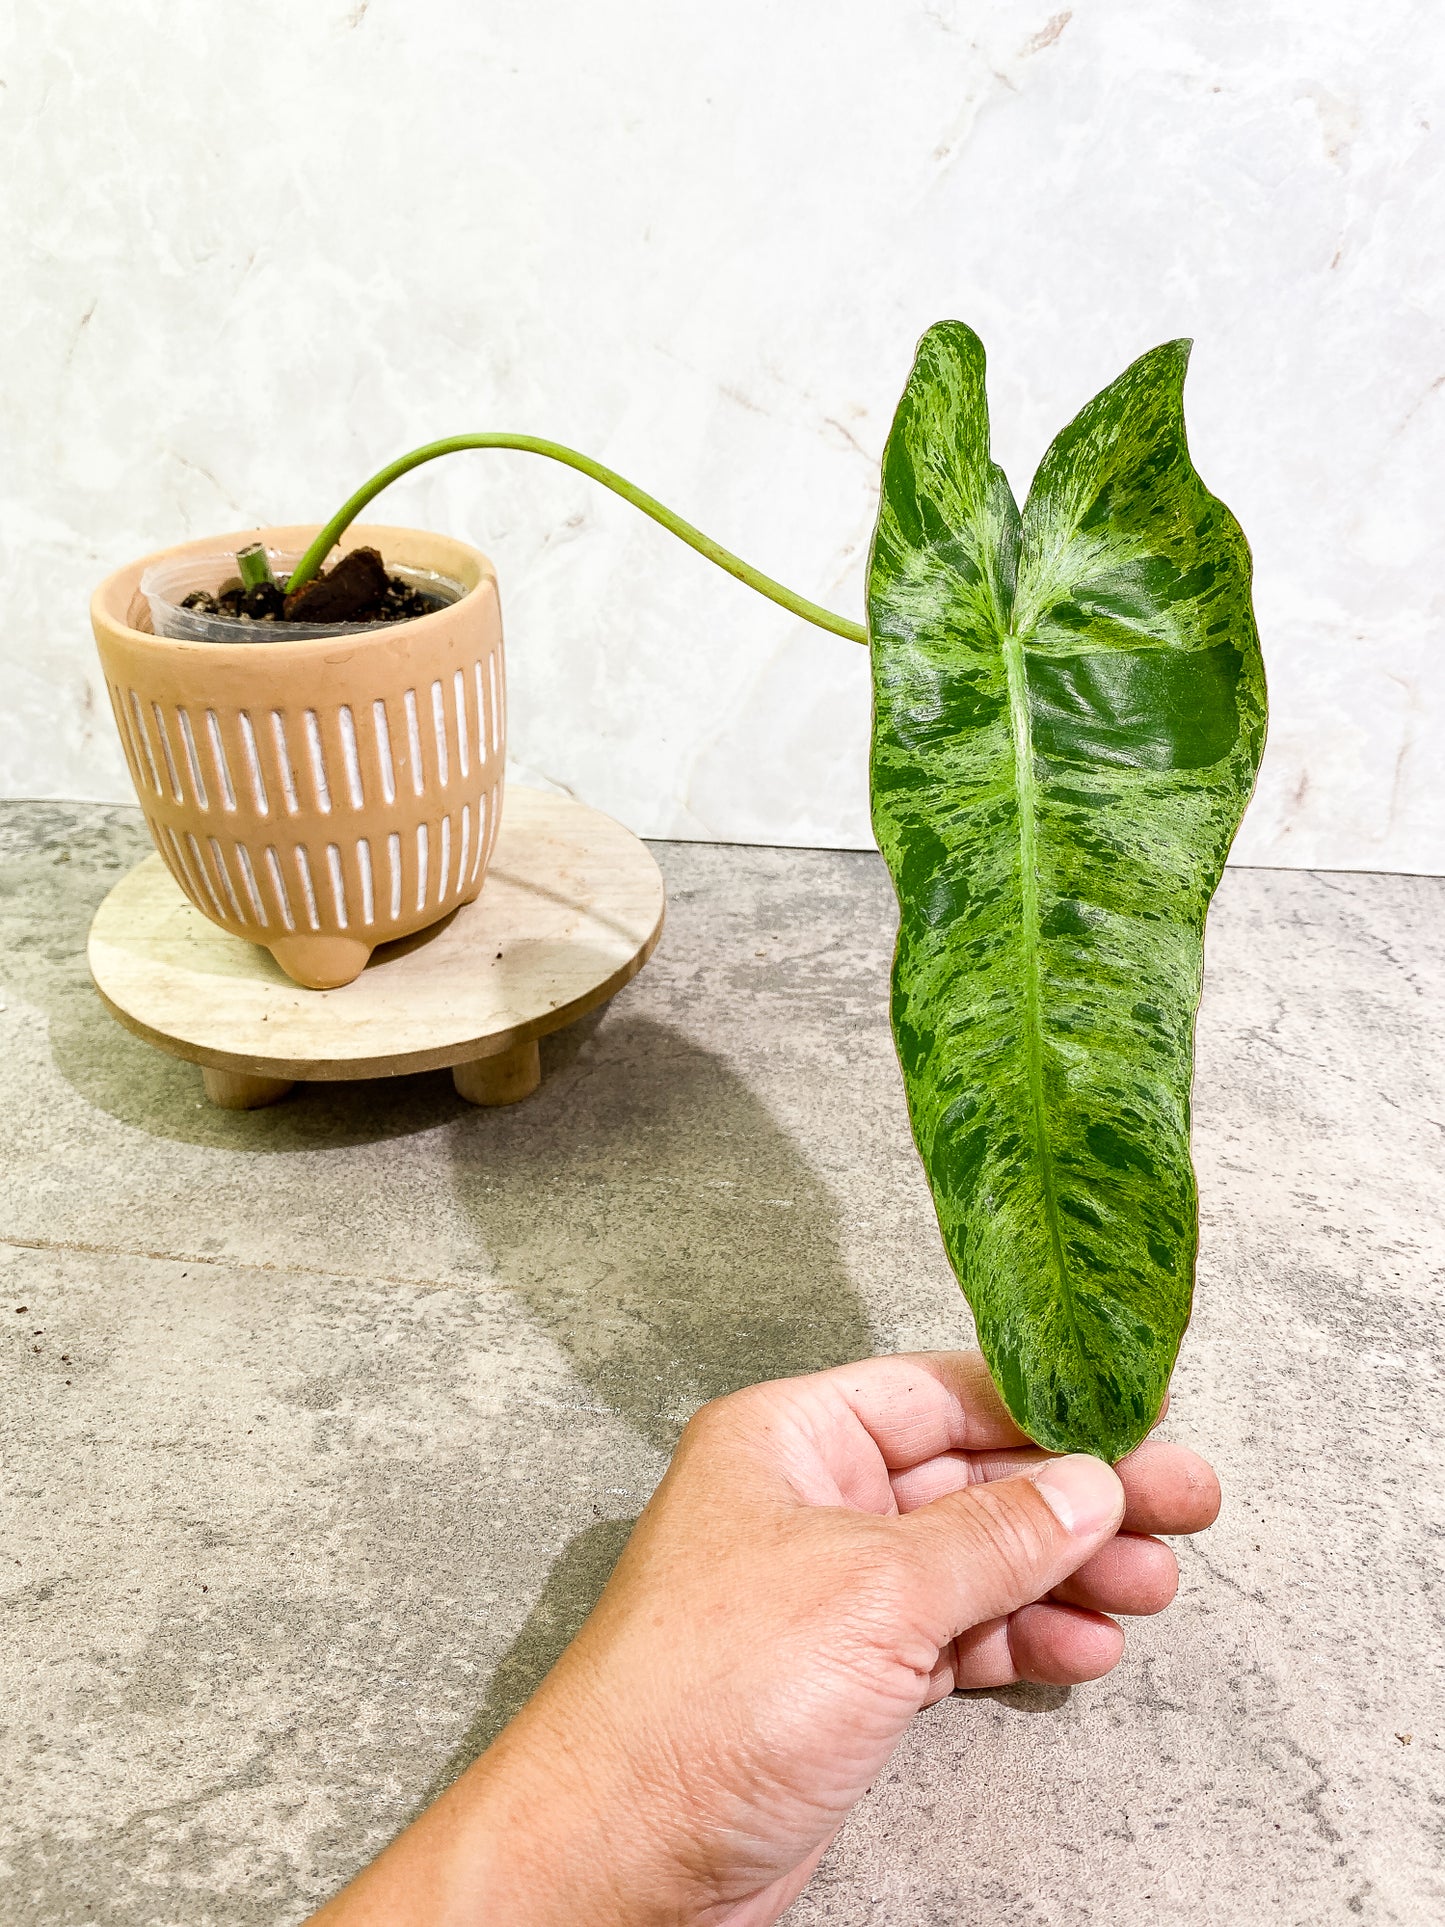 Philodendron Paraiso Verde 1 leaf 1 growth point fully rooted